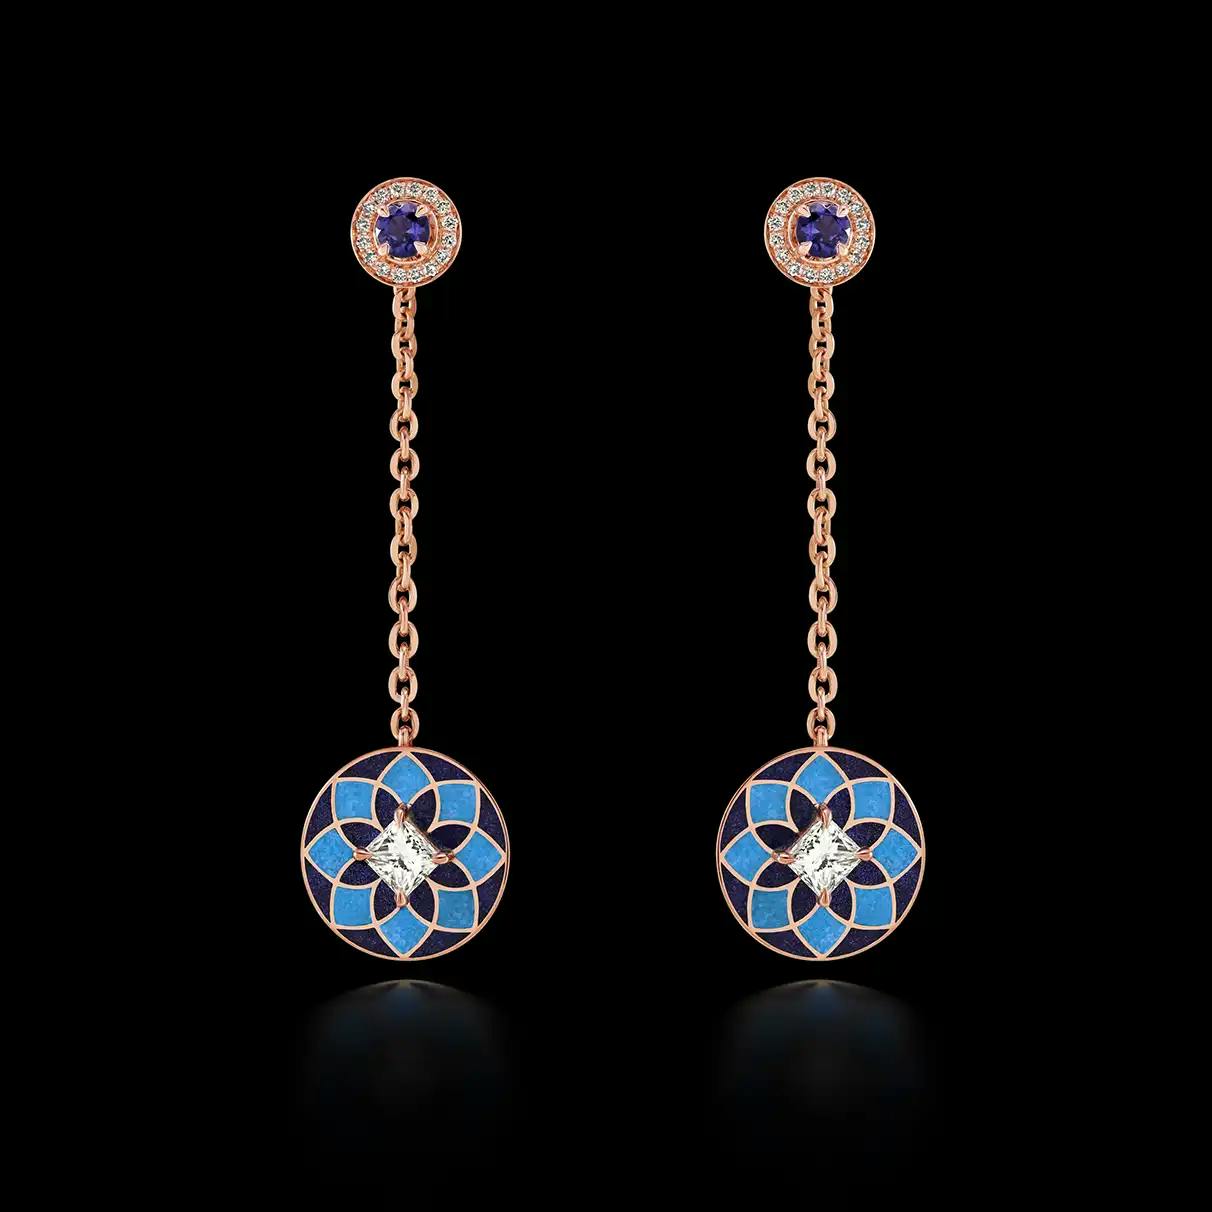 18K recycled rose-gold earrings with lapis and turquoise inlay, princess-cut diamonds and iolites.